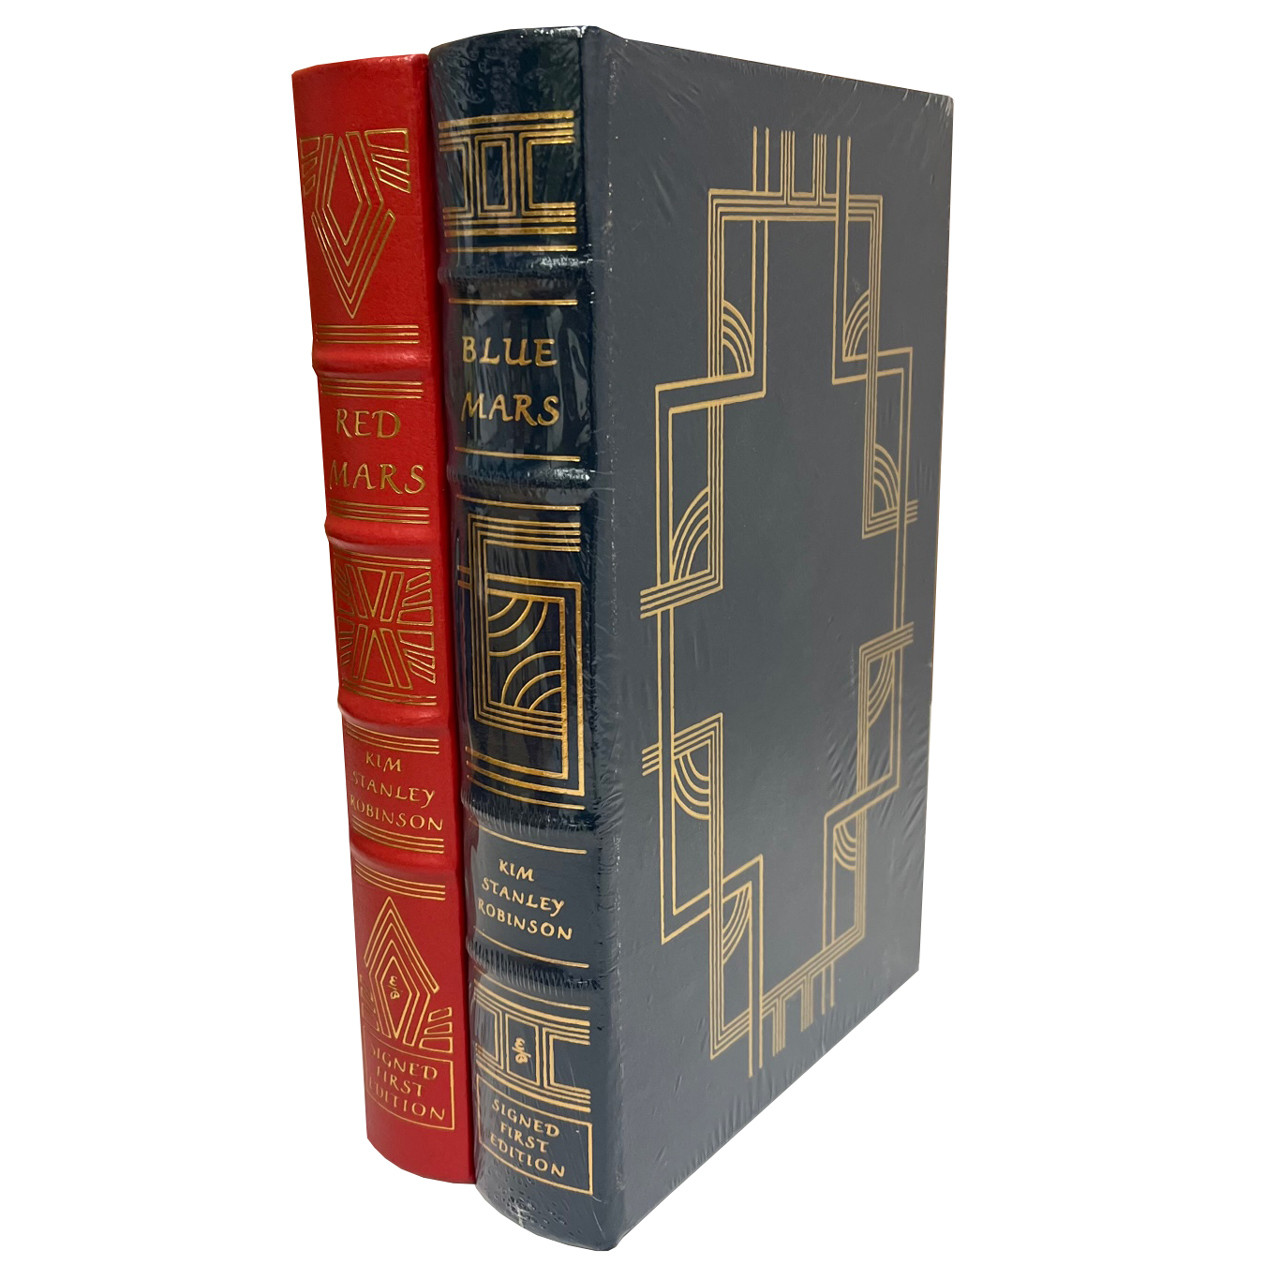 Kim Stanley Robinson "Red Mars" and "Blue Mars" 2-Volume Signed First Edition Matched Set, Leather Bound Limited Edition